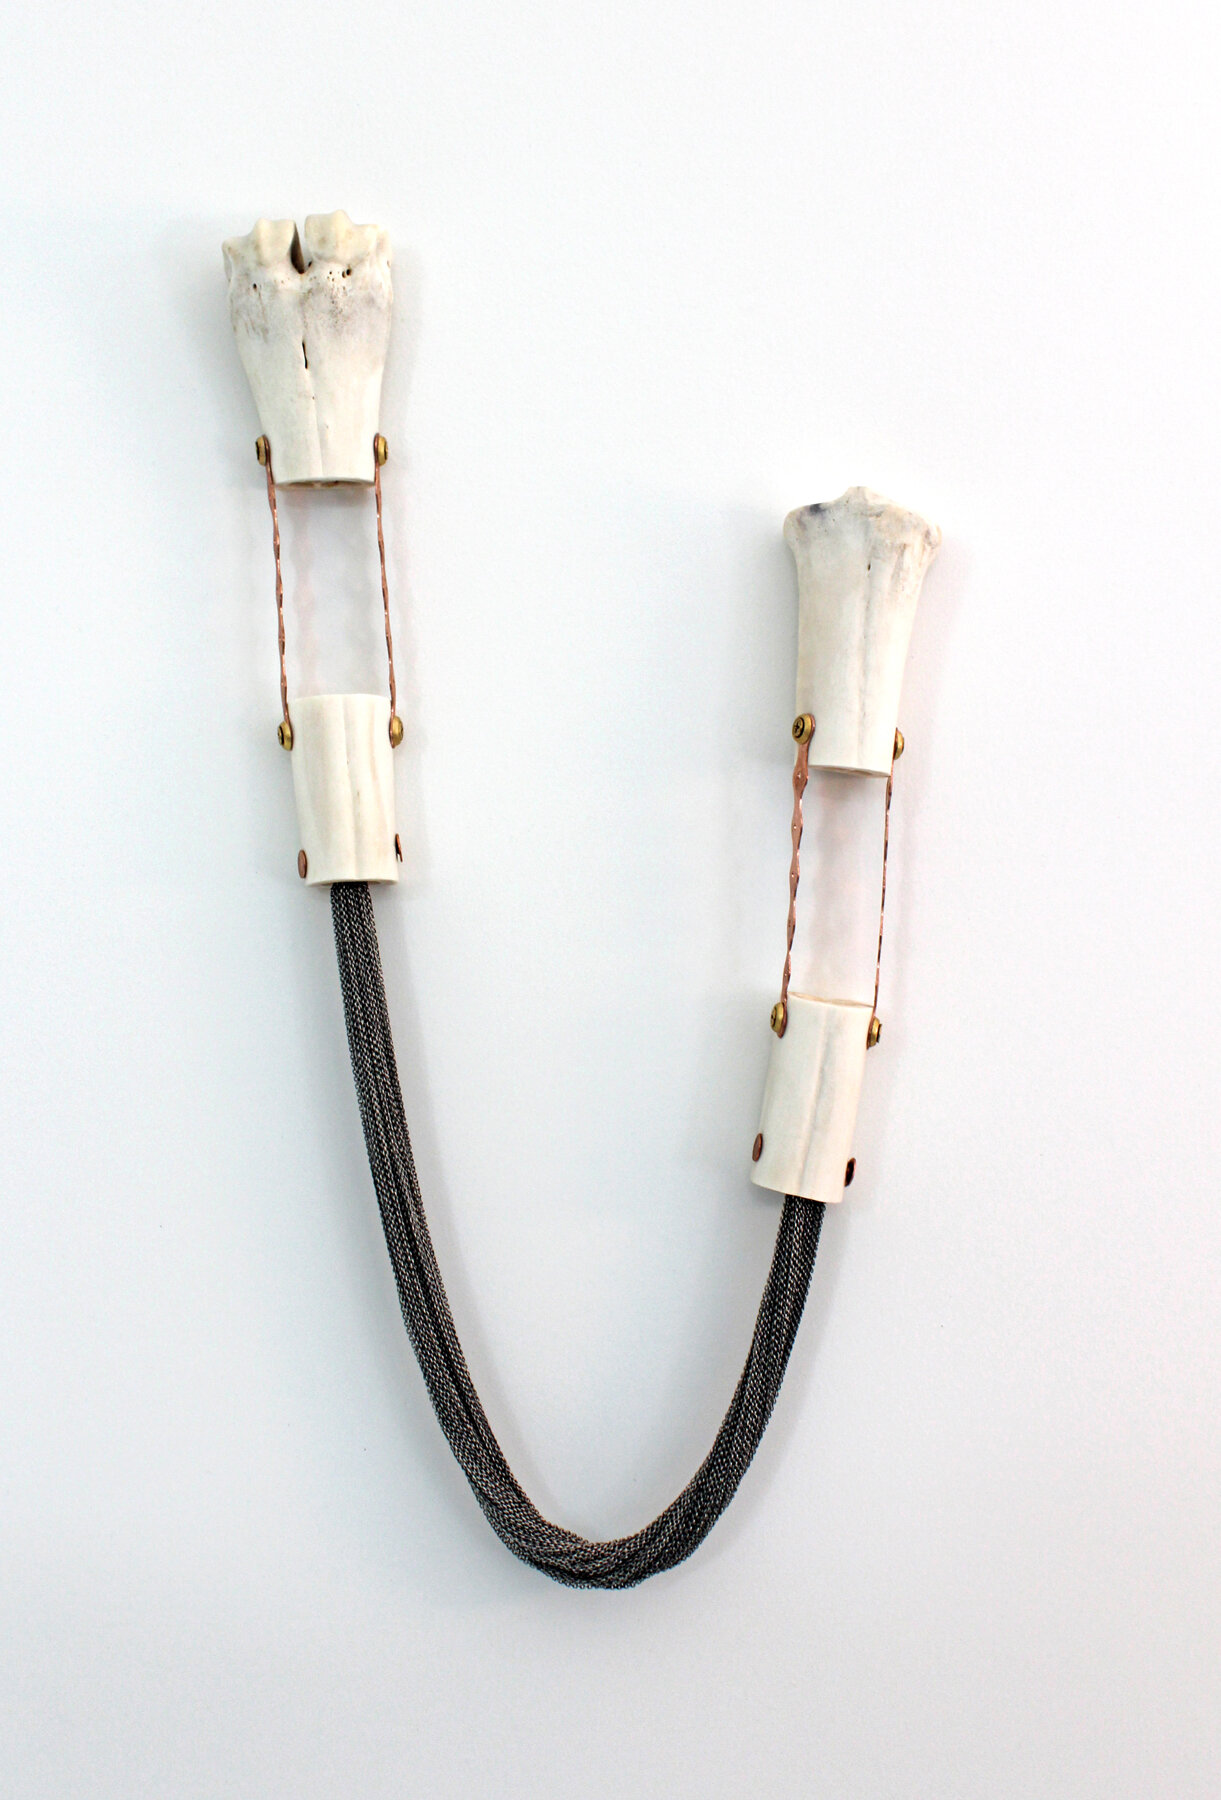    Chainged    moose tibia, chain and mixed-media, 19.5 x 9 x 2 inches 